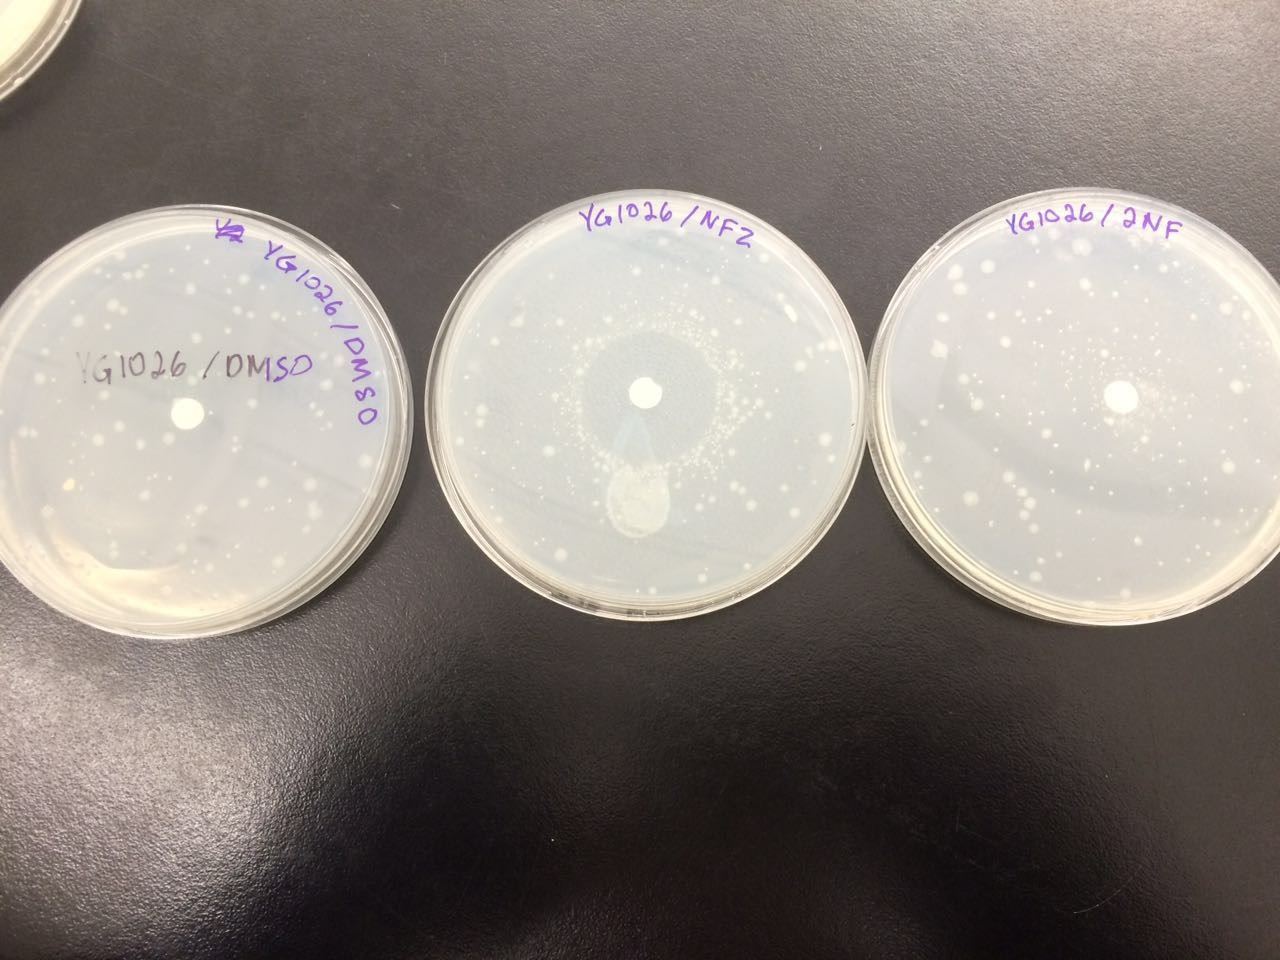 The plates with the Salmonella strain YG 1026.